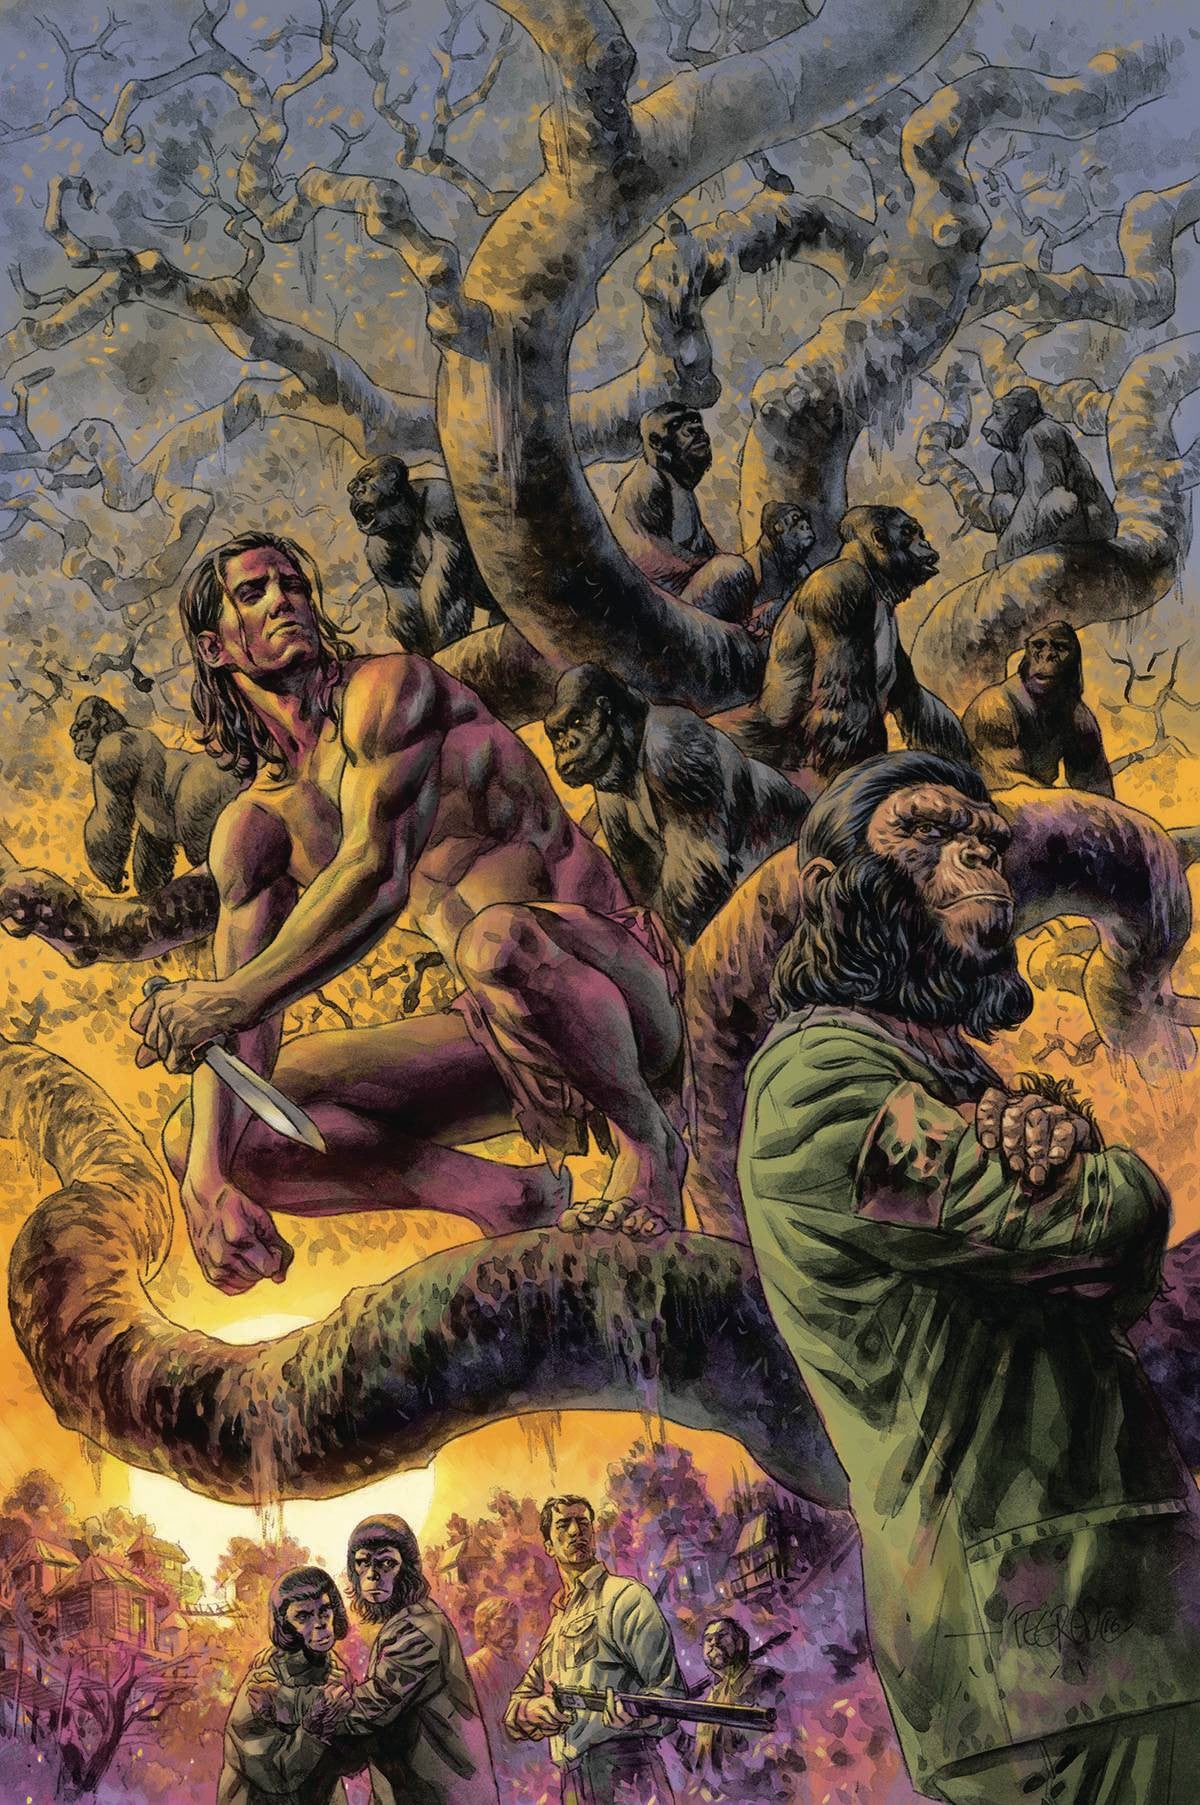 TARZAN ON THE PLANET OF THE APES #1 (OF 5) COVER